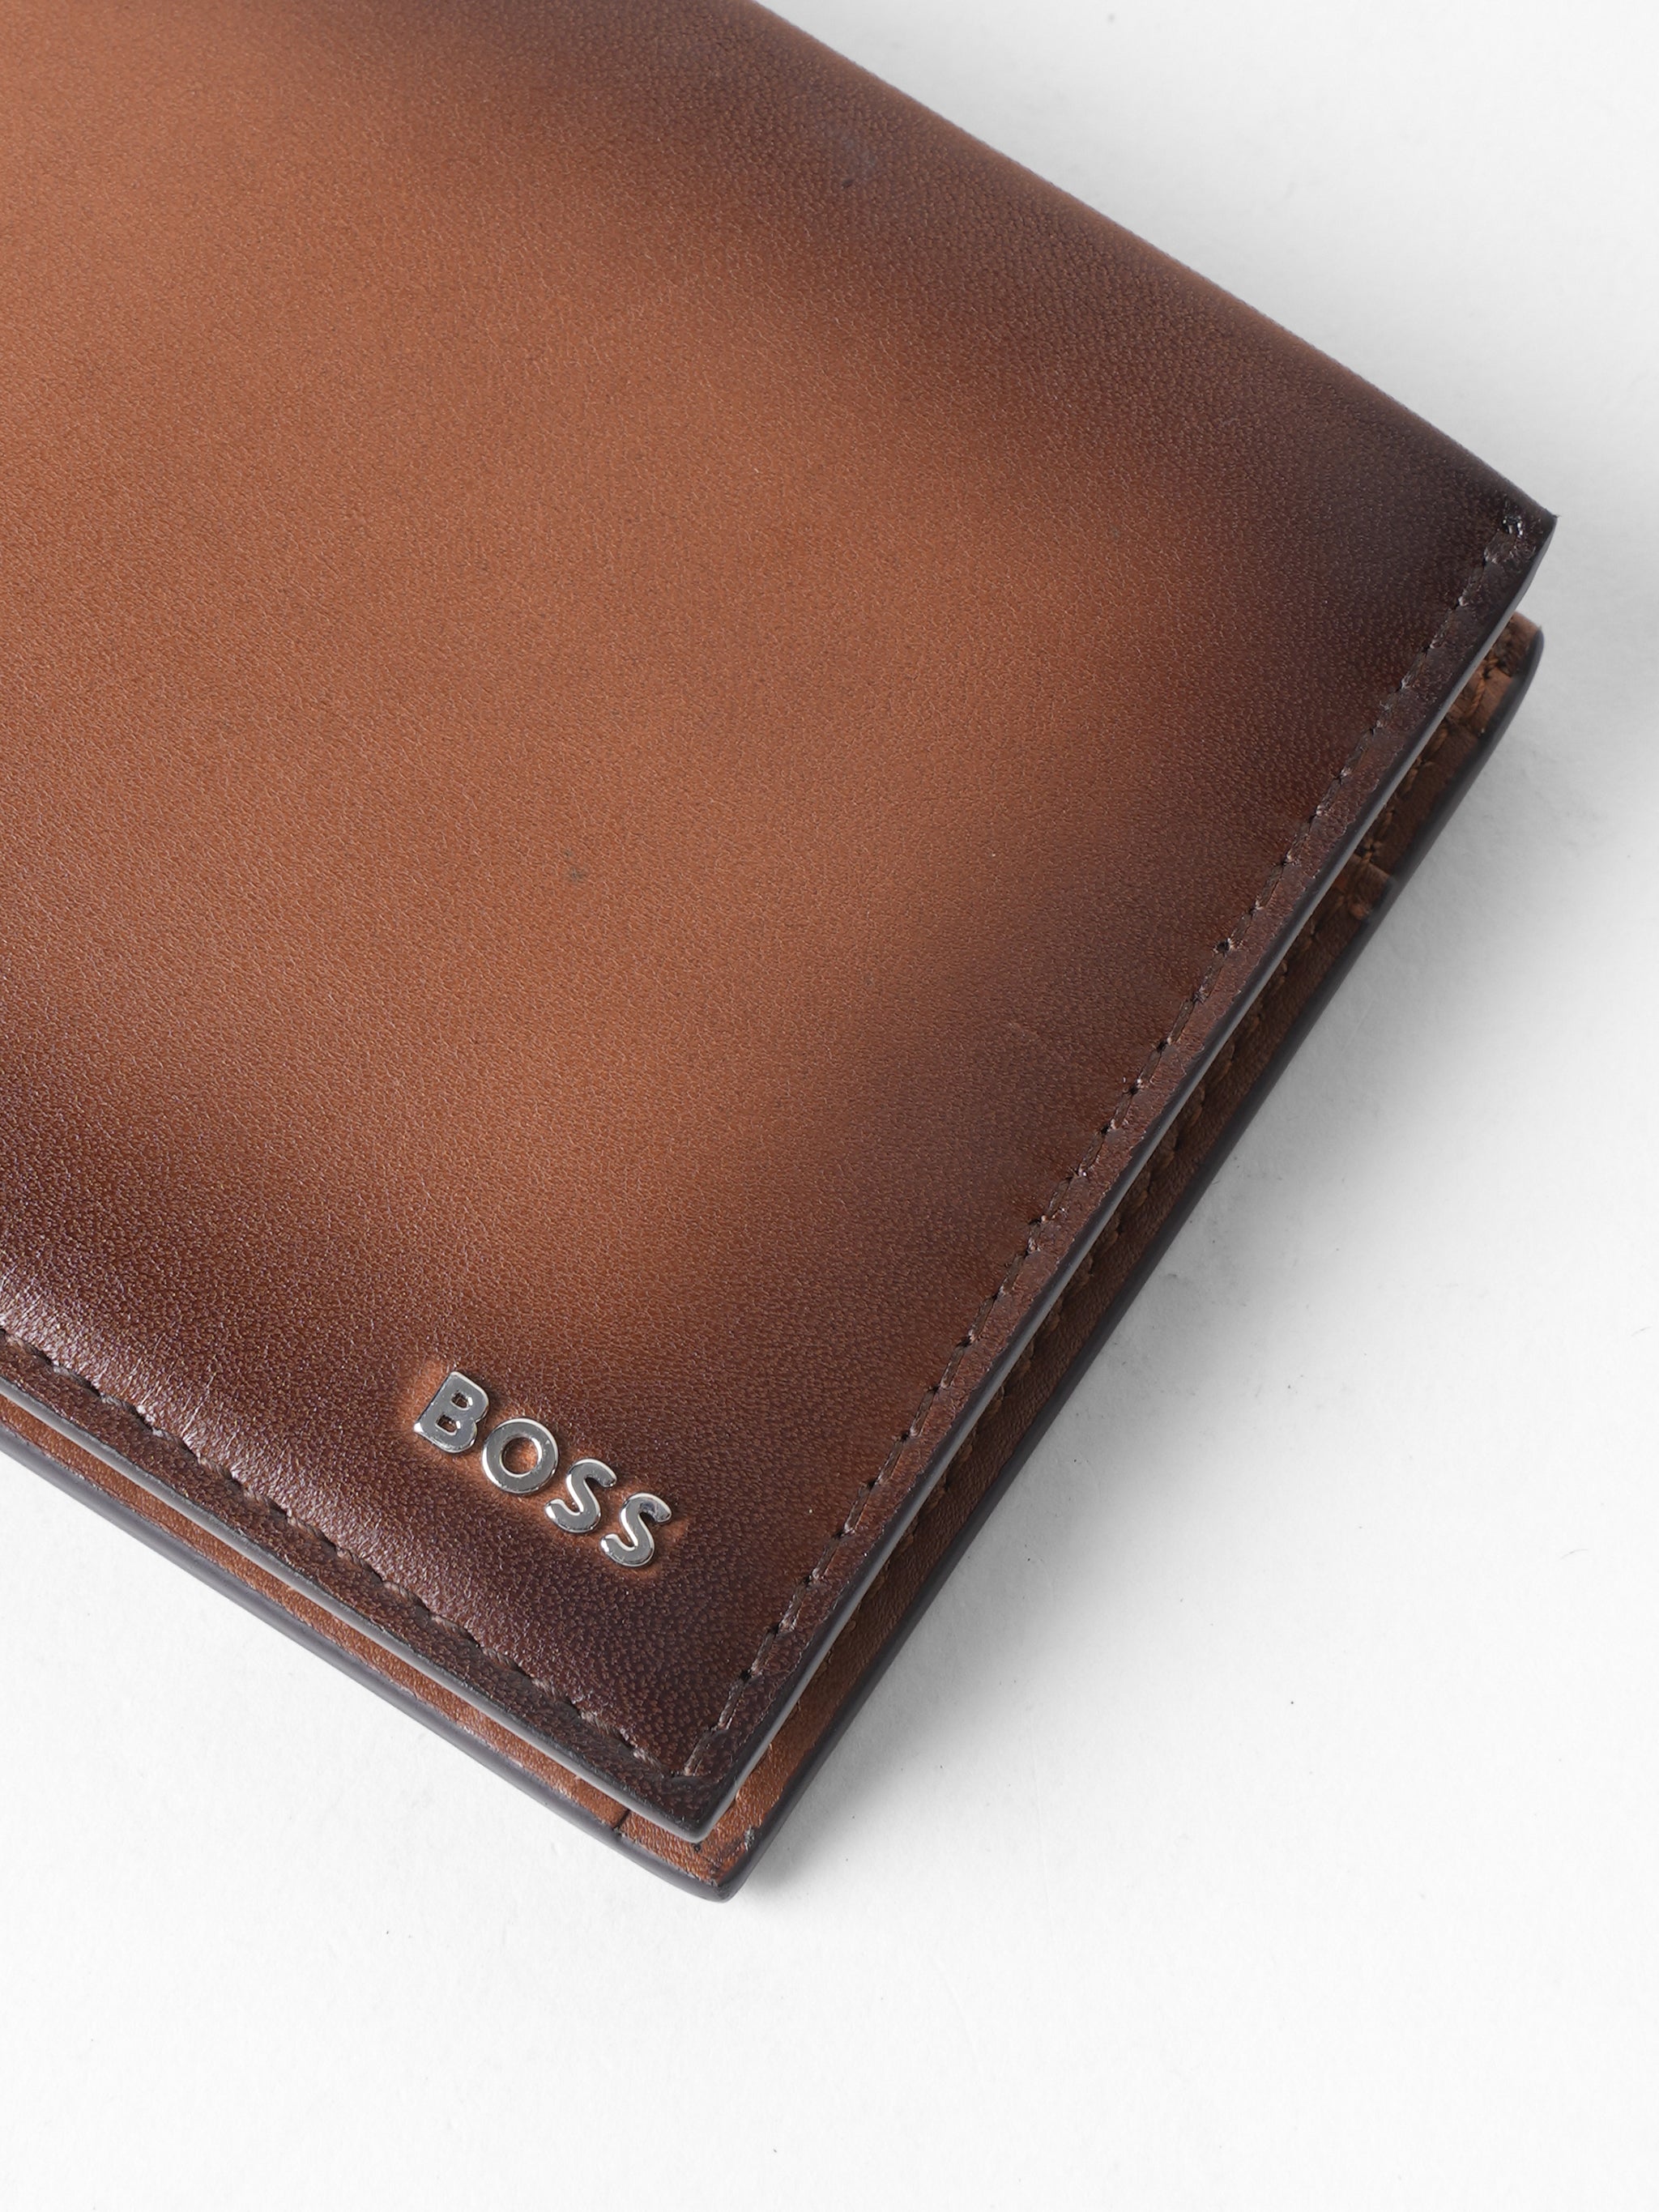 Hugo Boss Leather Wallet With Polished Silver Lettering